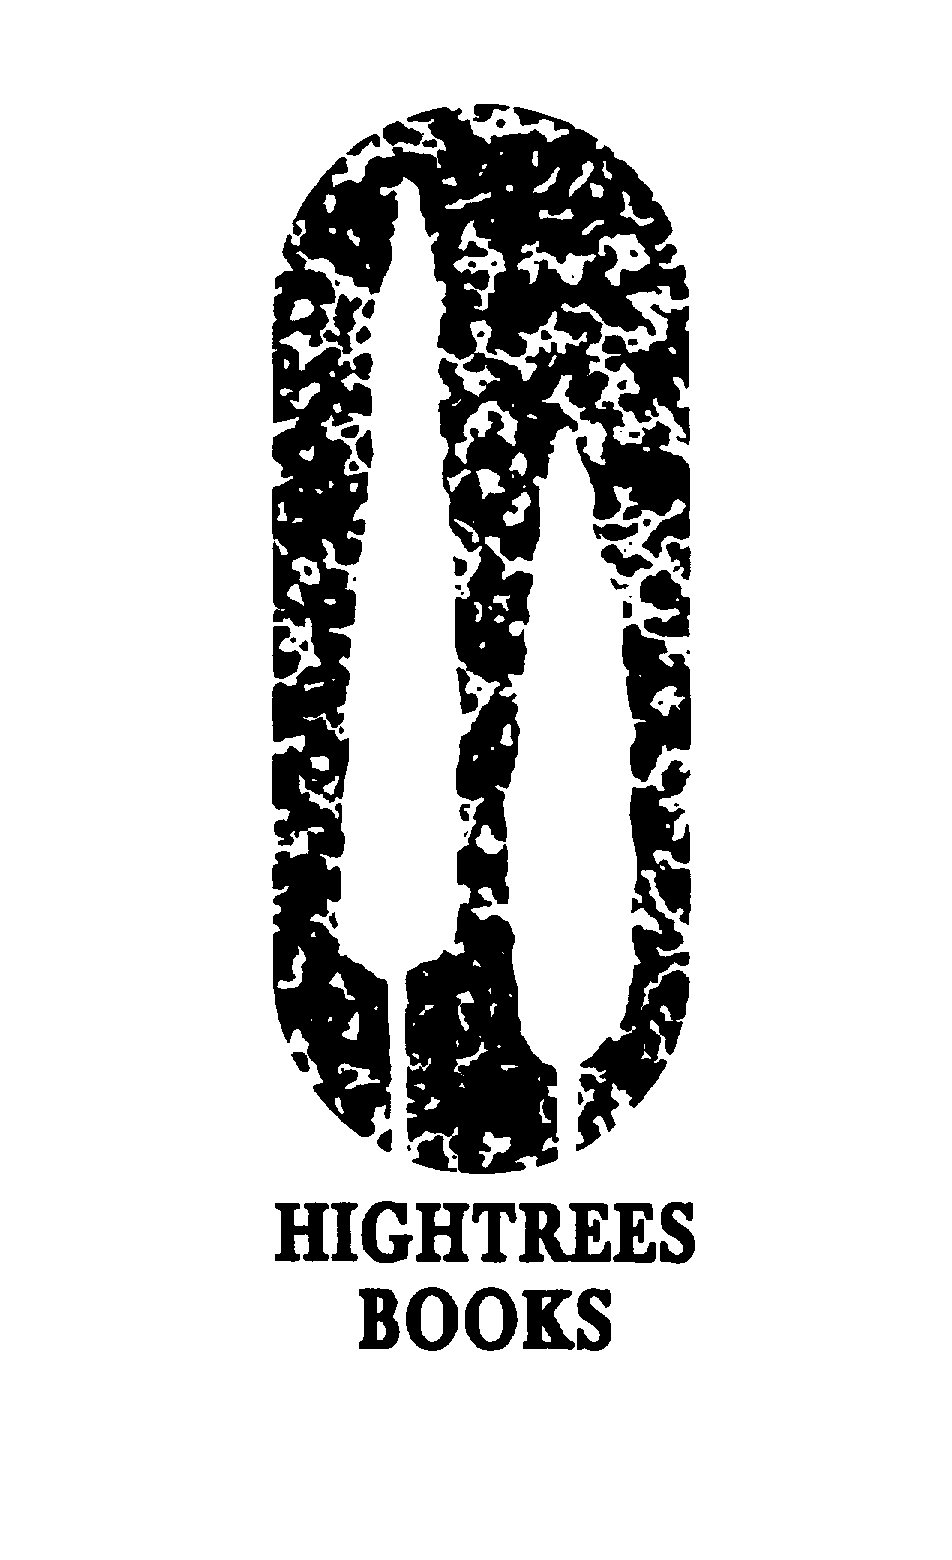  HIGHTREES BOOKS